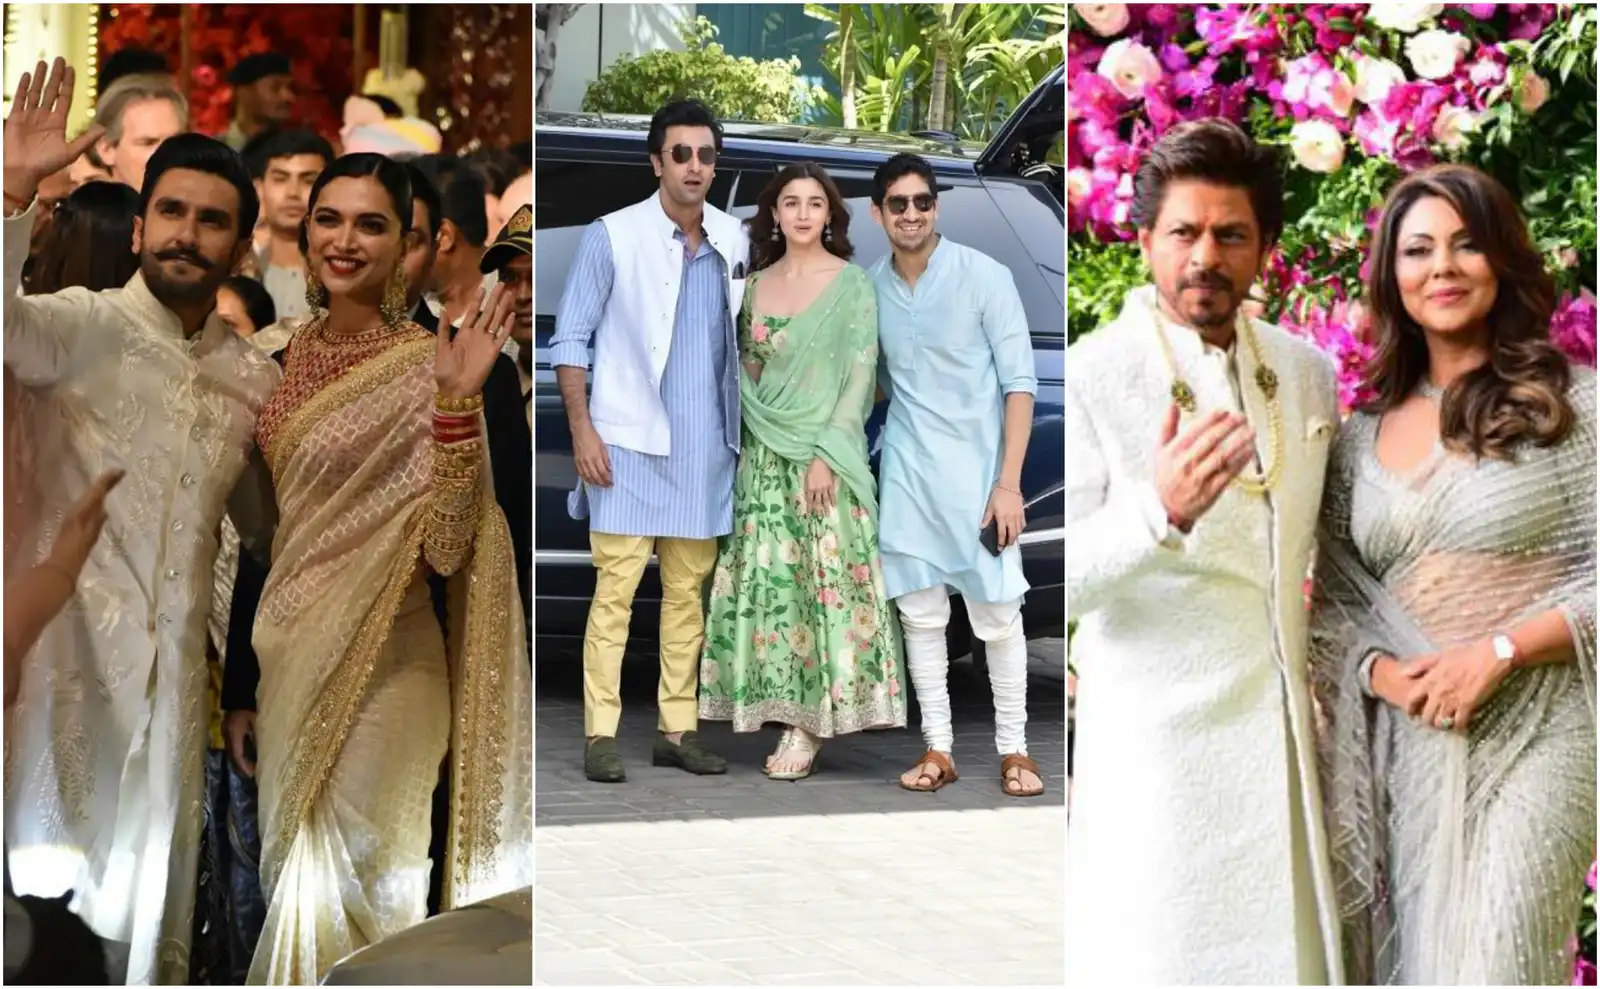 Ganesh Chaturthi 2019: Let These Golden Couples Of Bollywood Give You Some Festive Fashion Inspiration